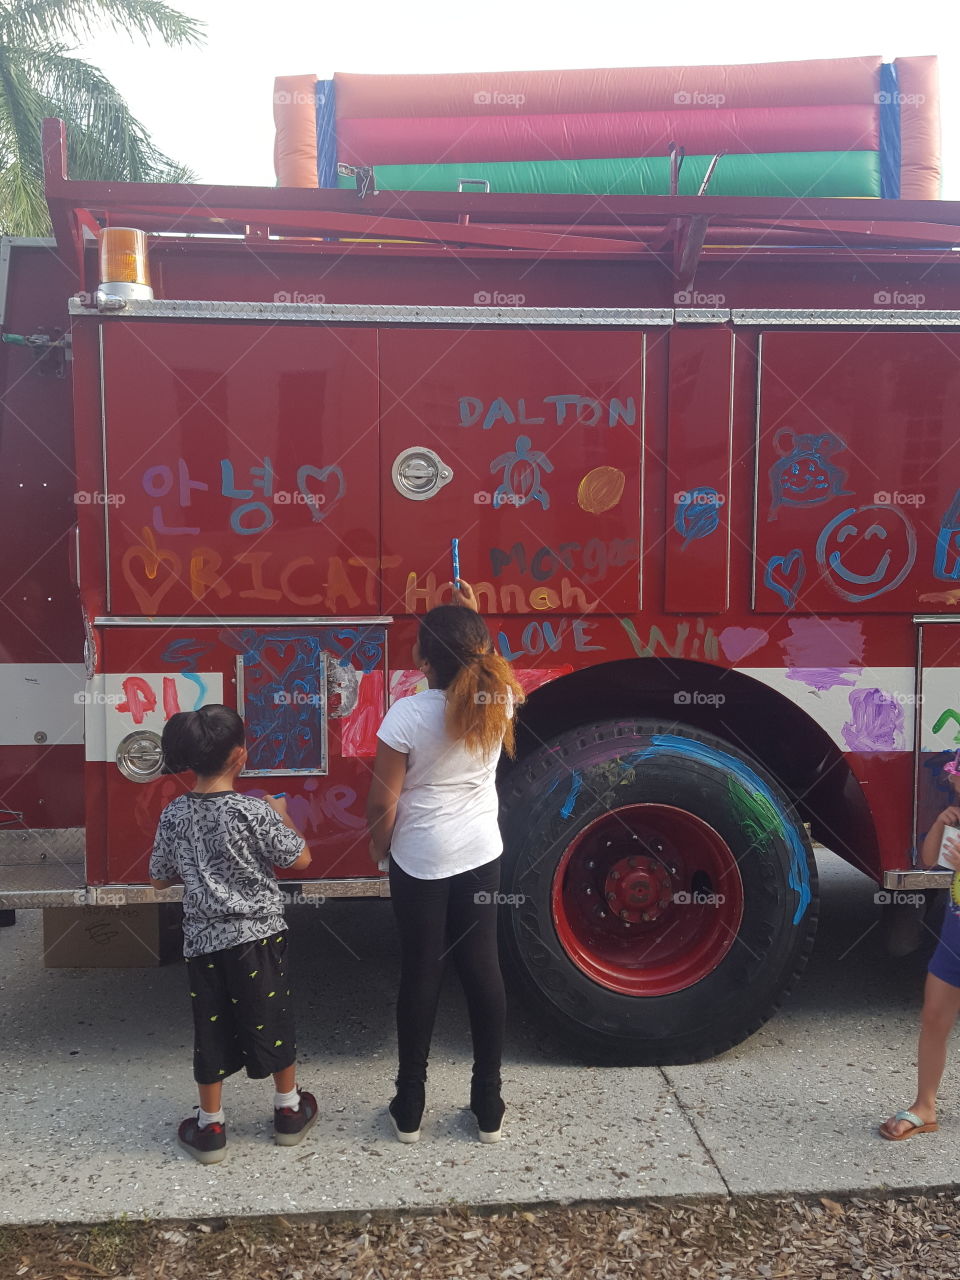 the kids were painting the fire trucks as part of the fun before the reopening of school.